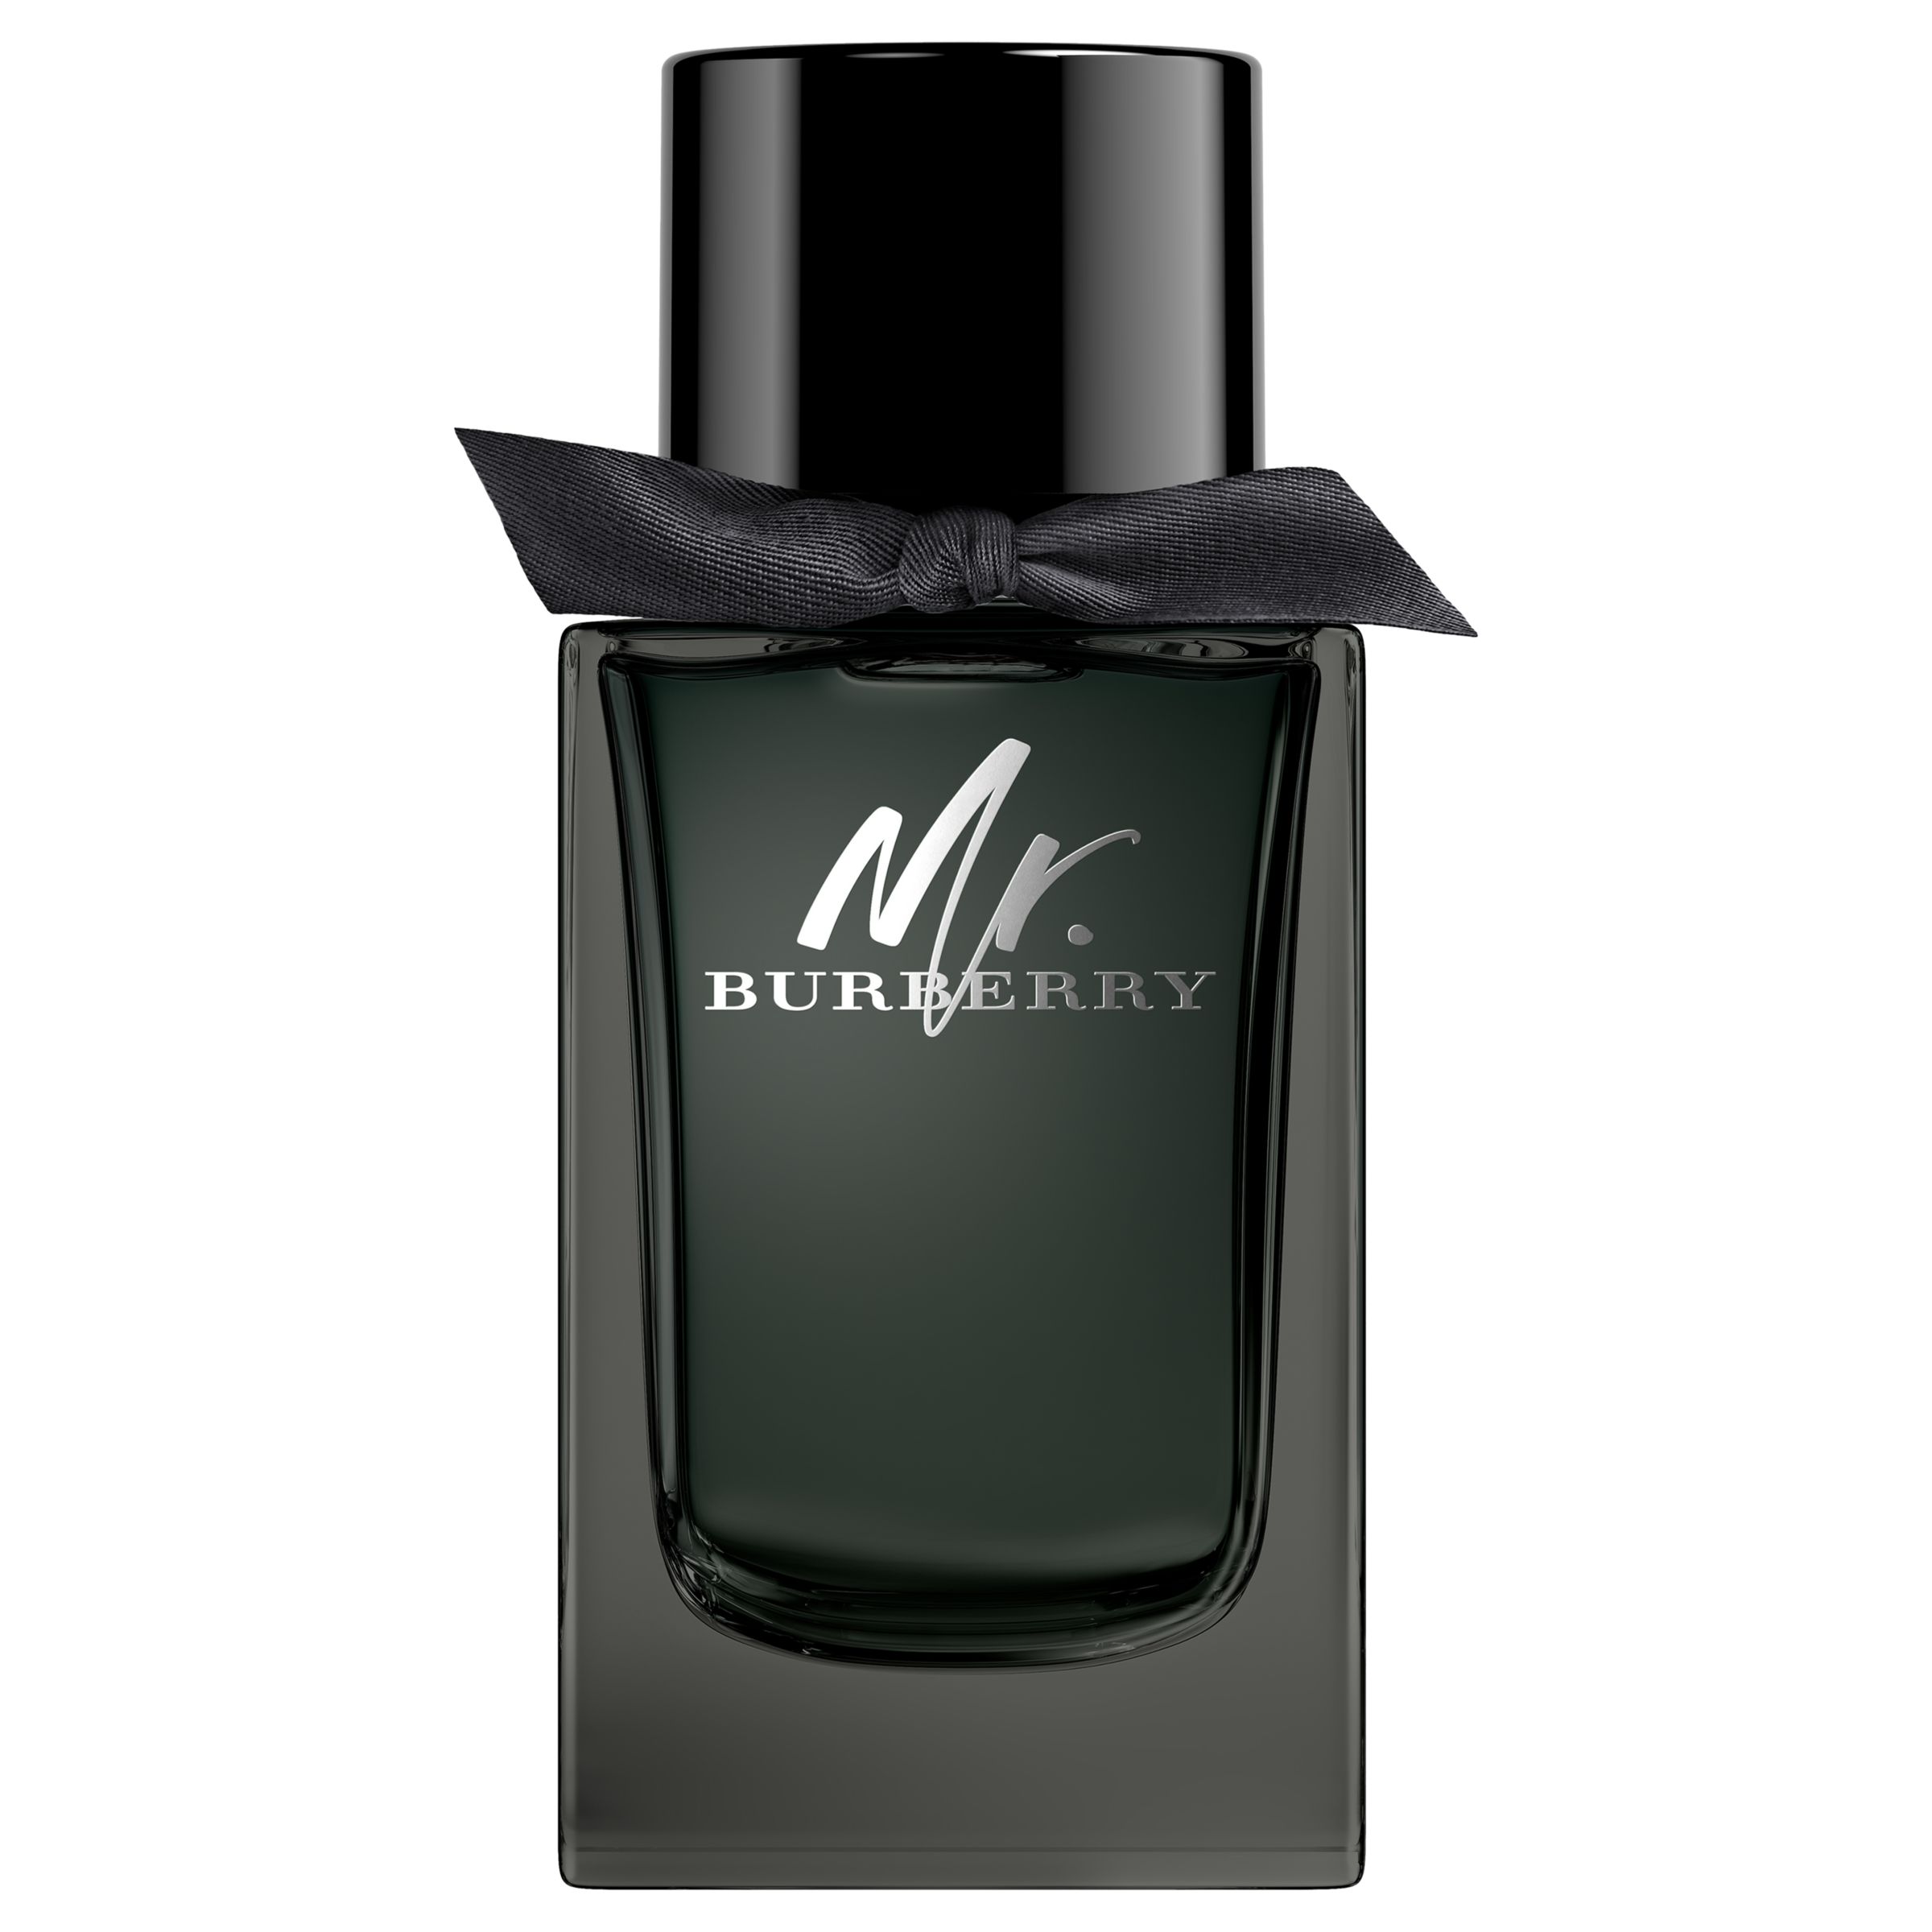 all burberry colognes